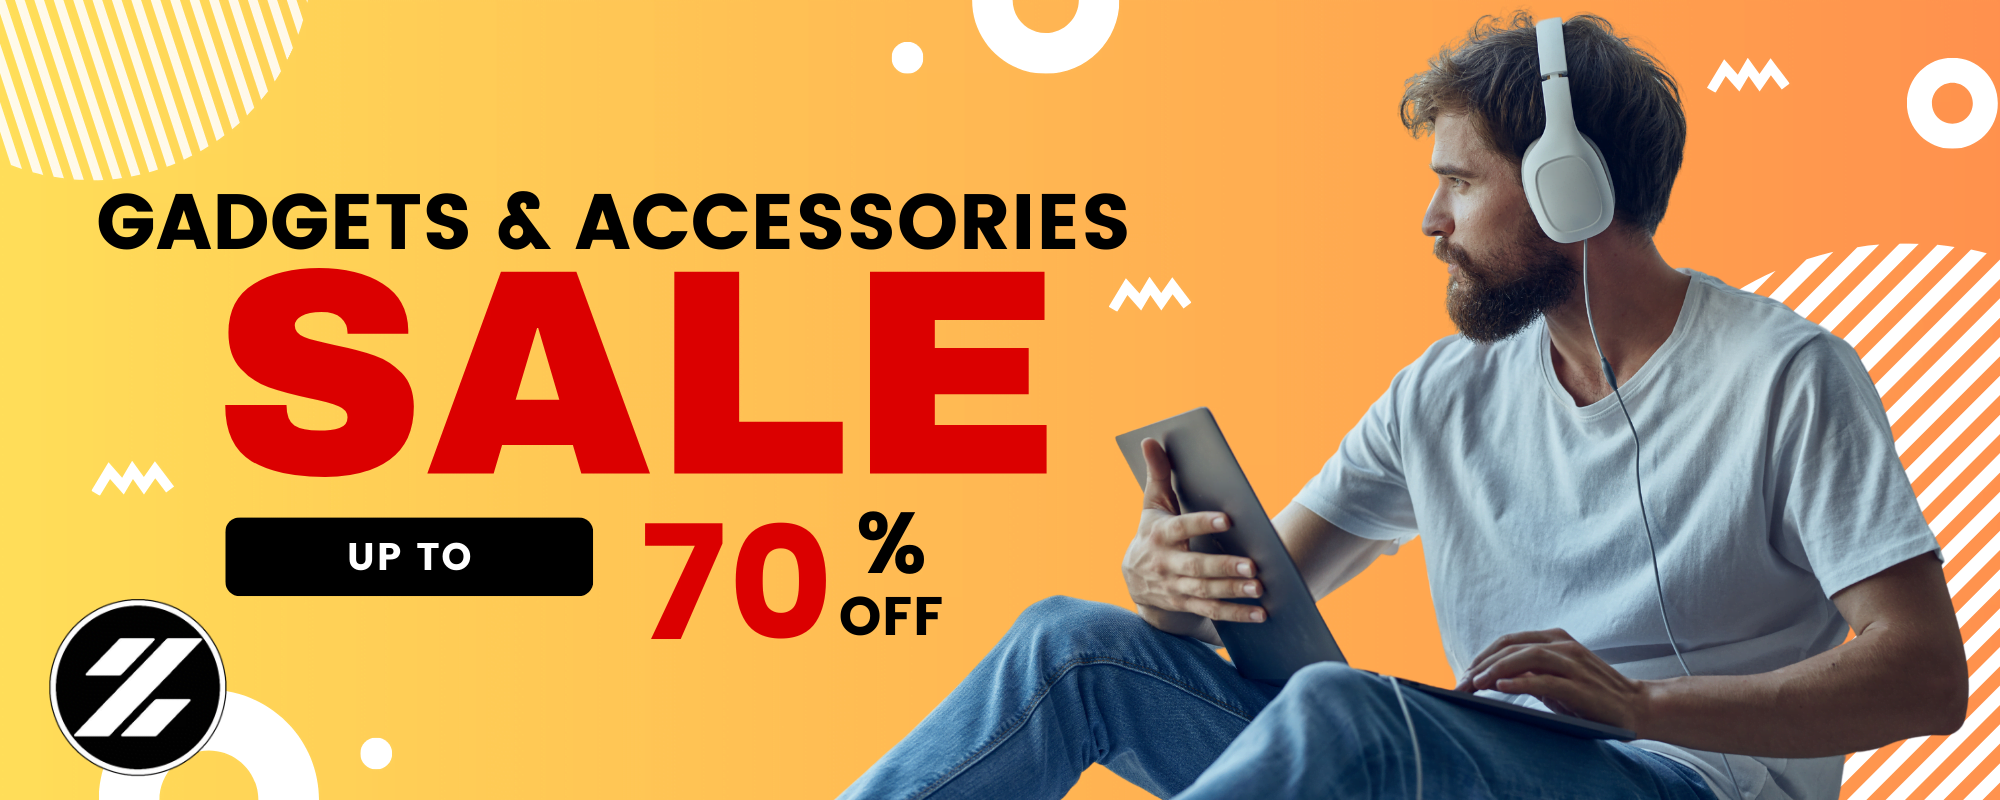 Electronic Gadgets and Mobile & Computer Accessories up to 70% OFF